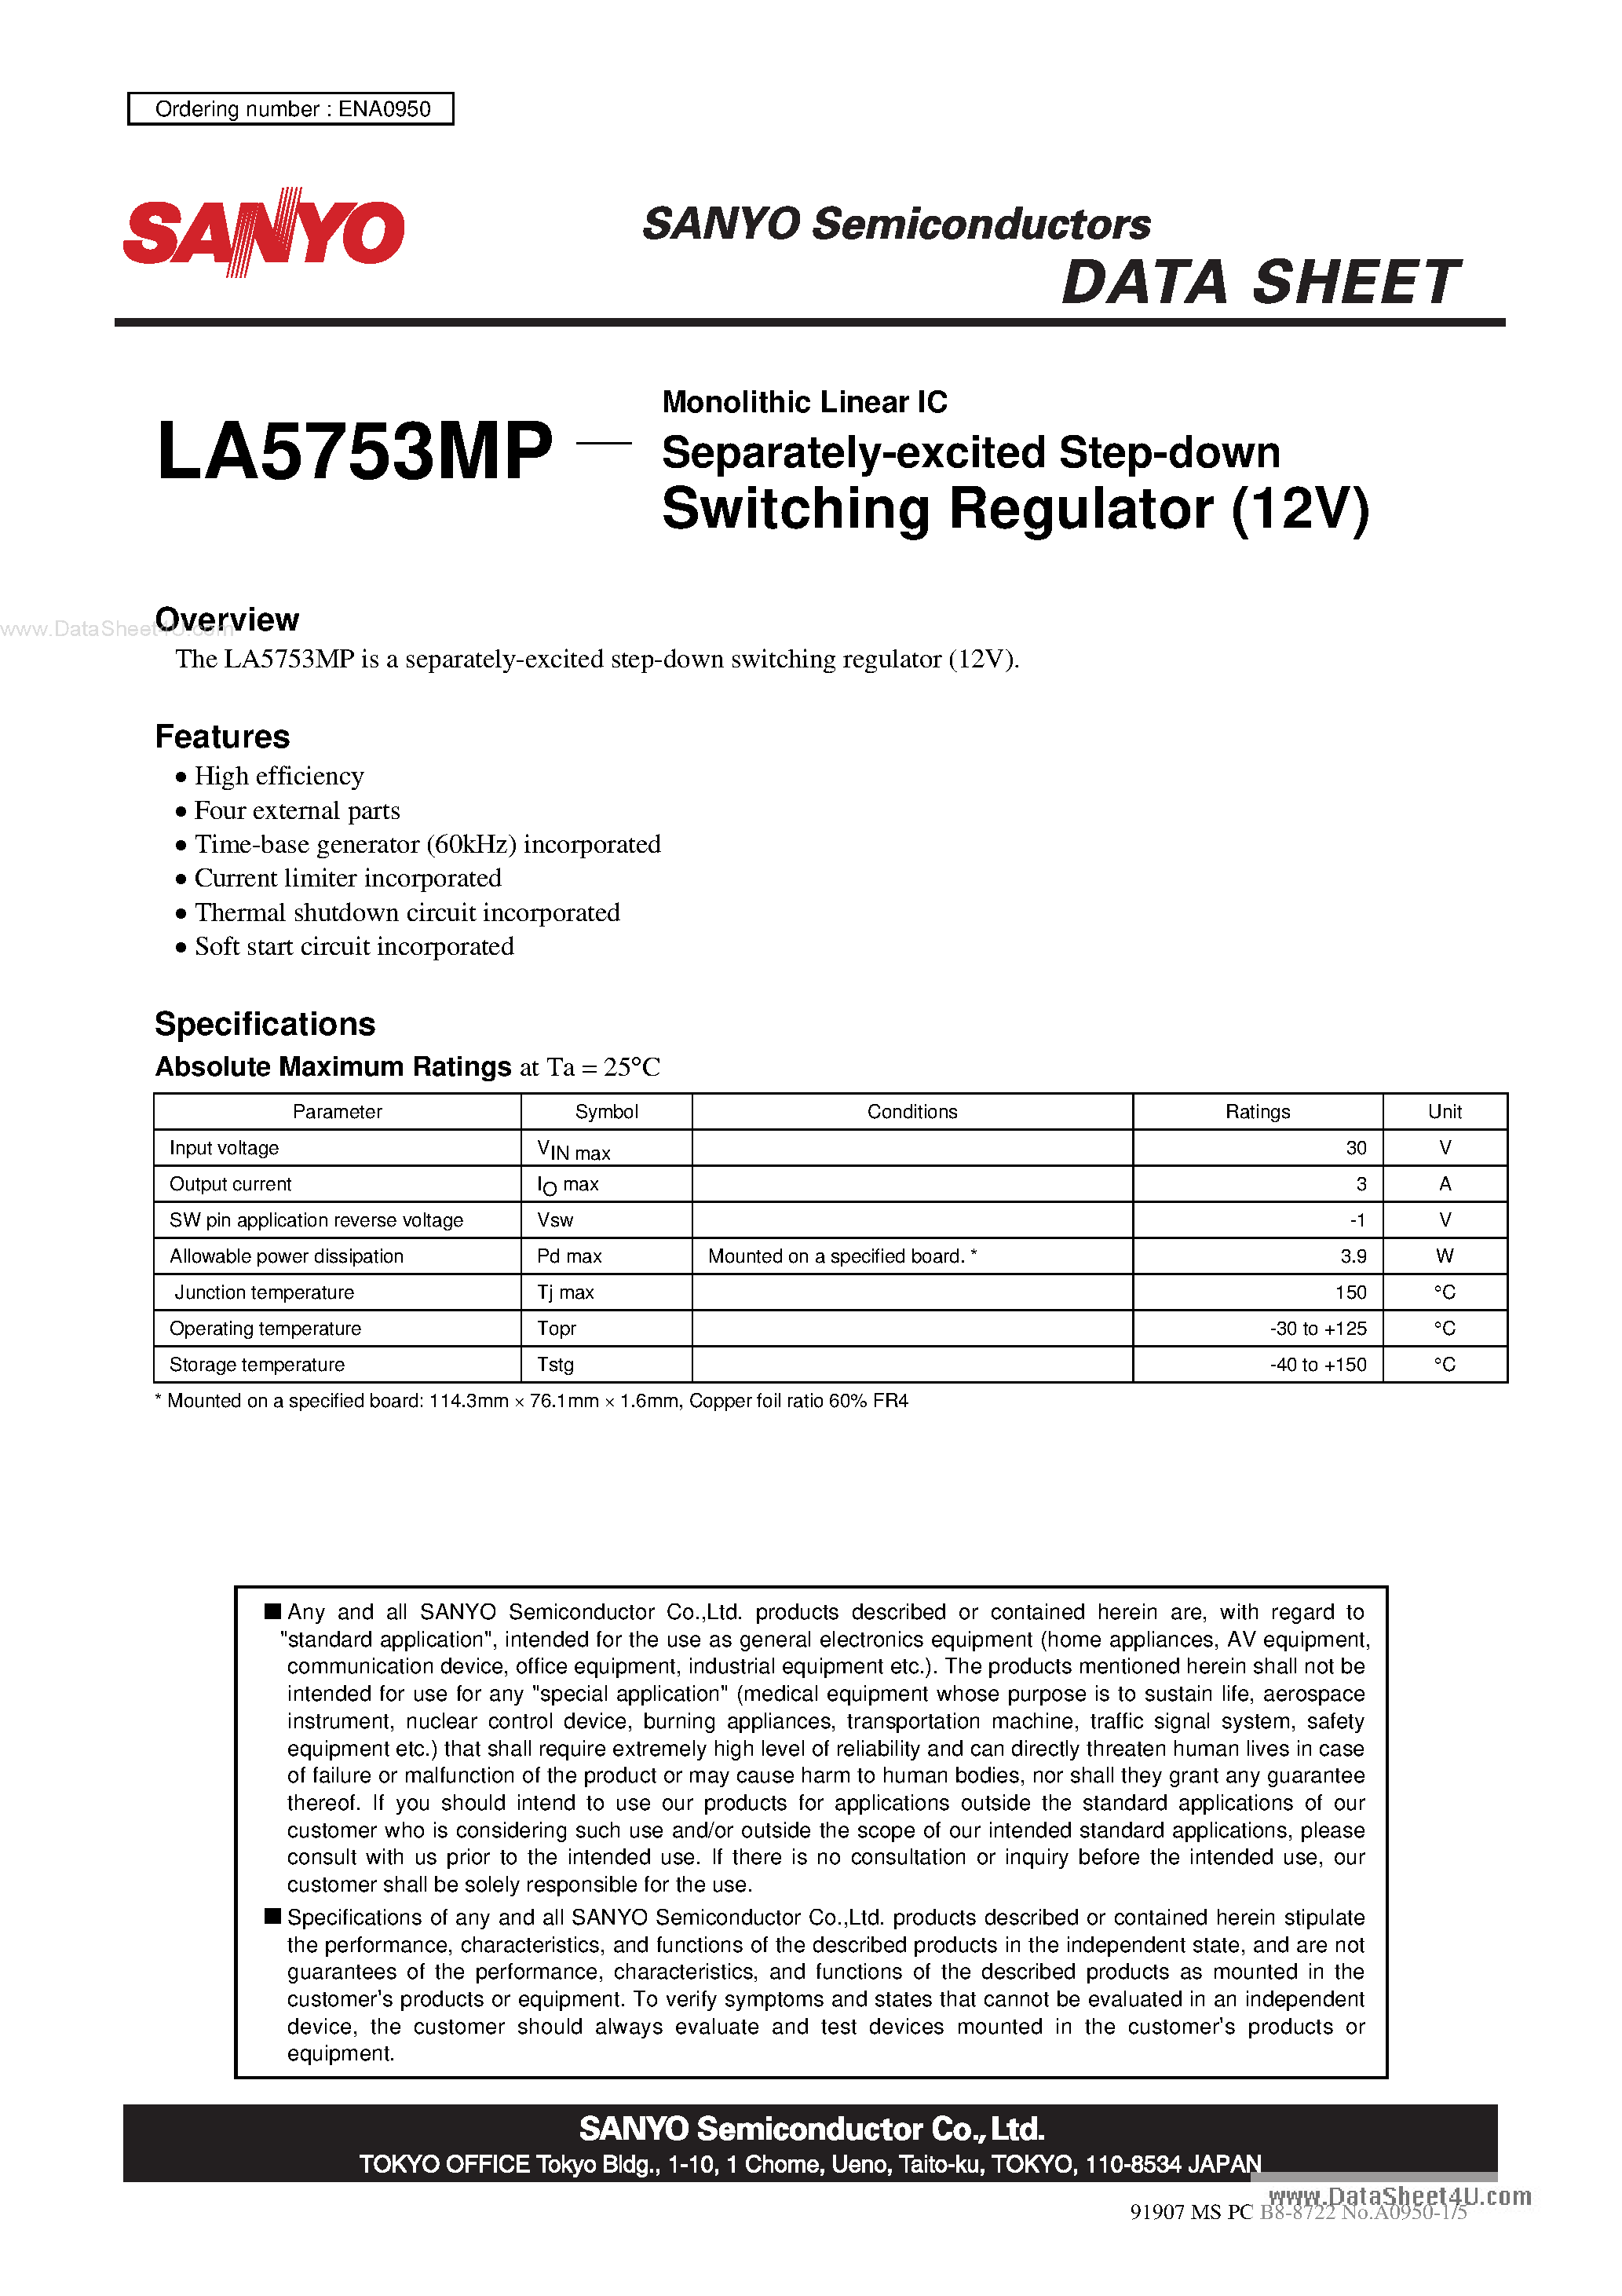 Даташит LA5753MP-Monolithic Linear IC Separately-Excited Step-Down Switching Regulator страница 1